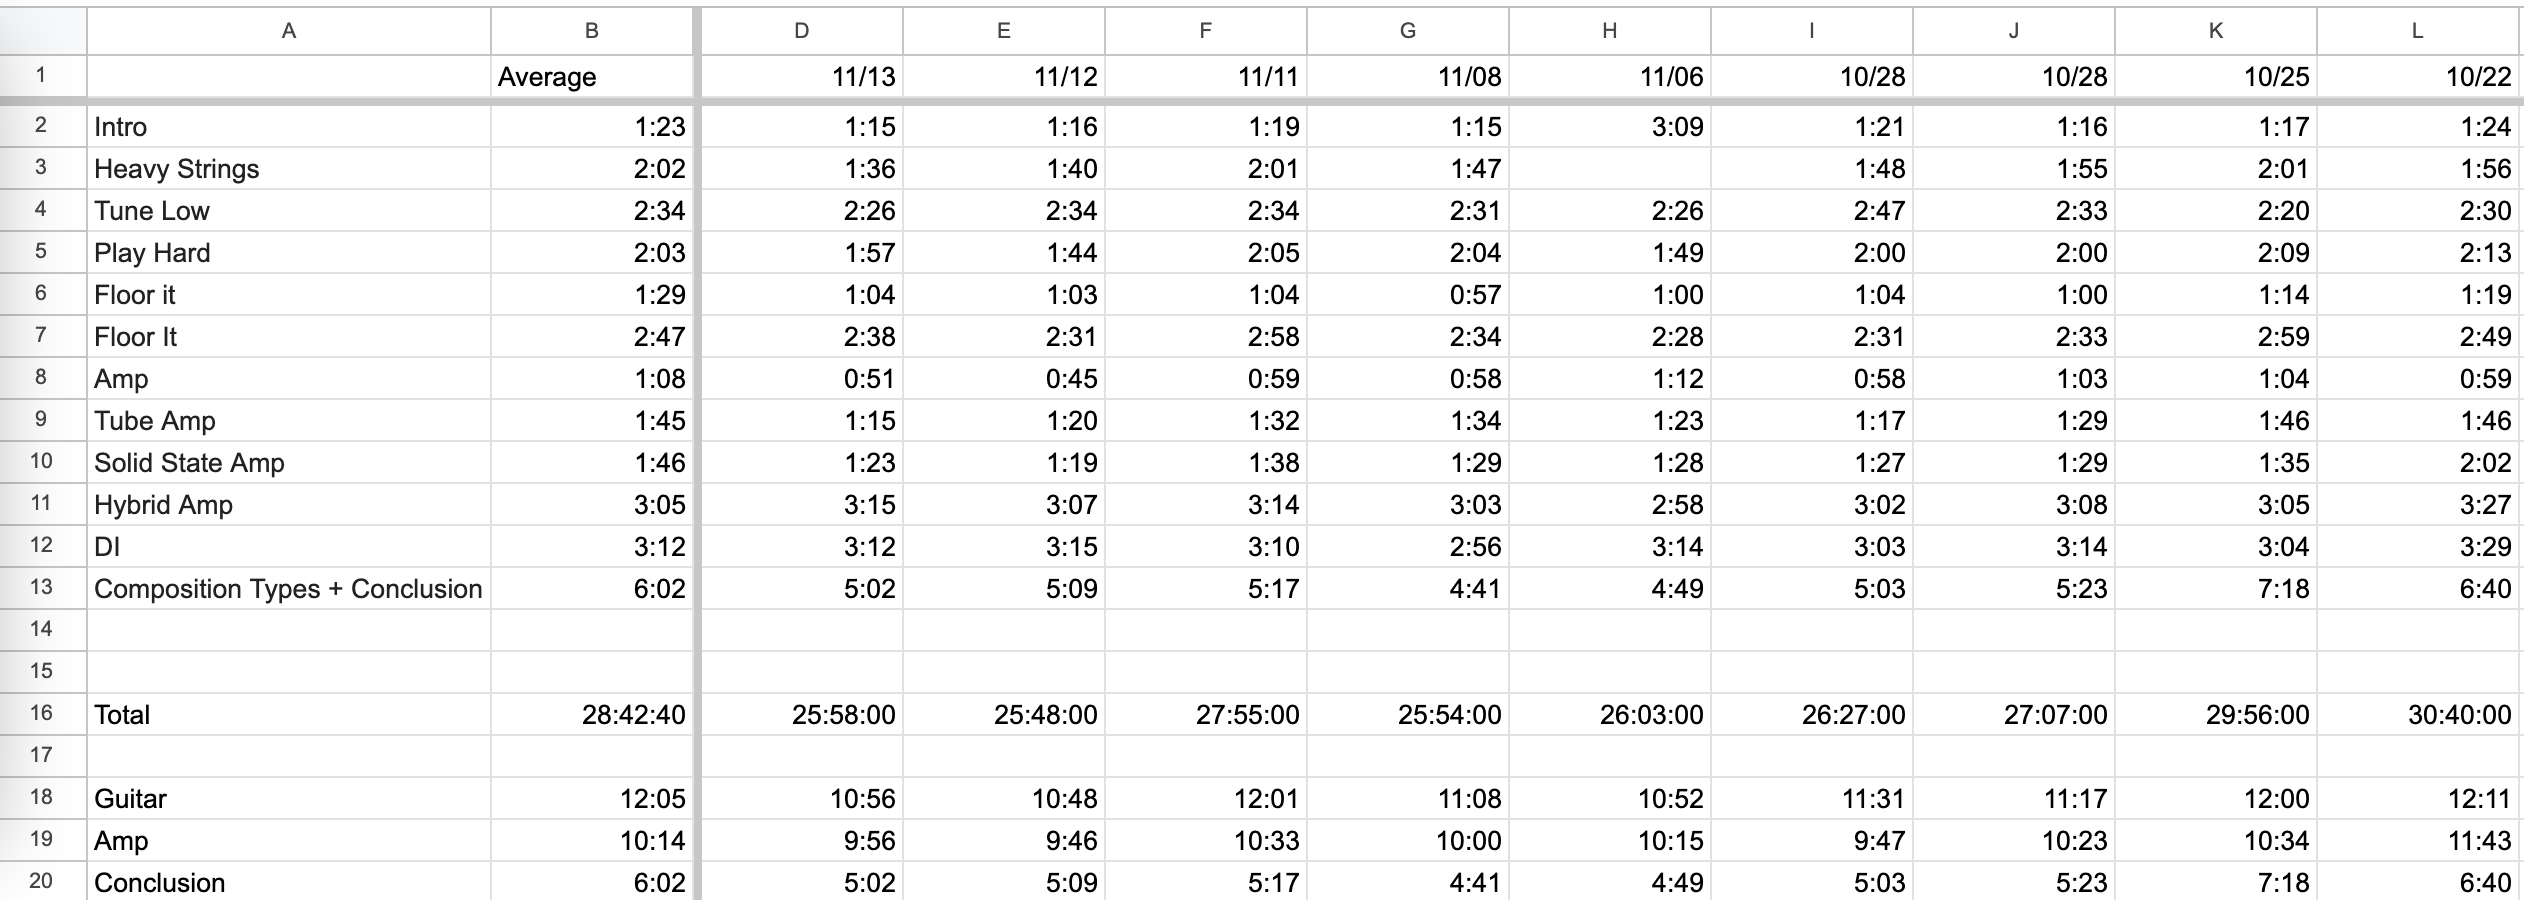 A spreadsheet keeping track of how long sections of my presentation are taking when practicing.